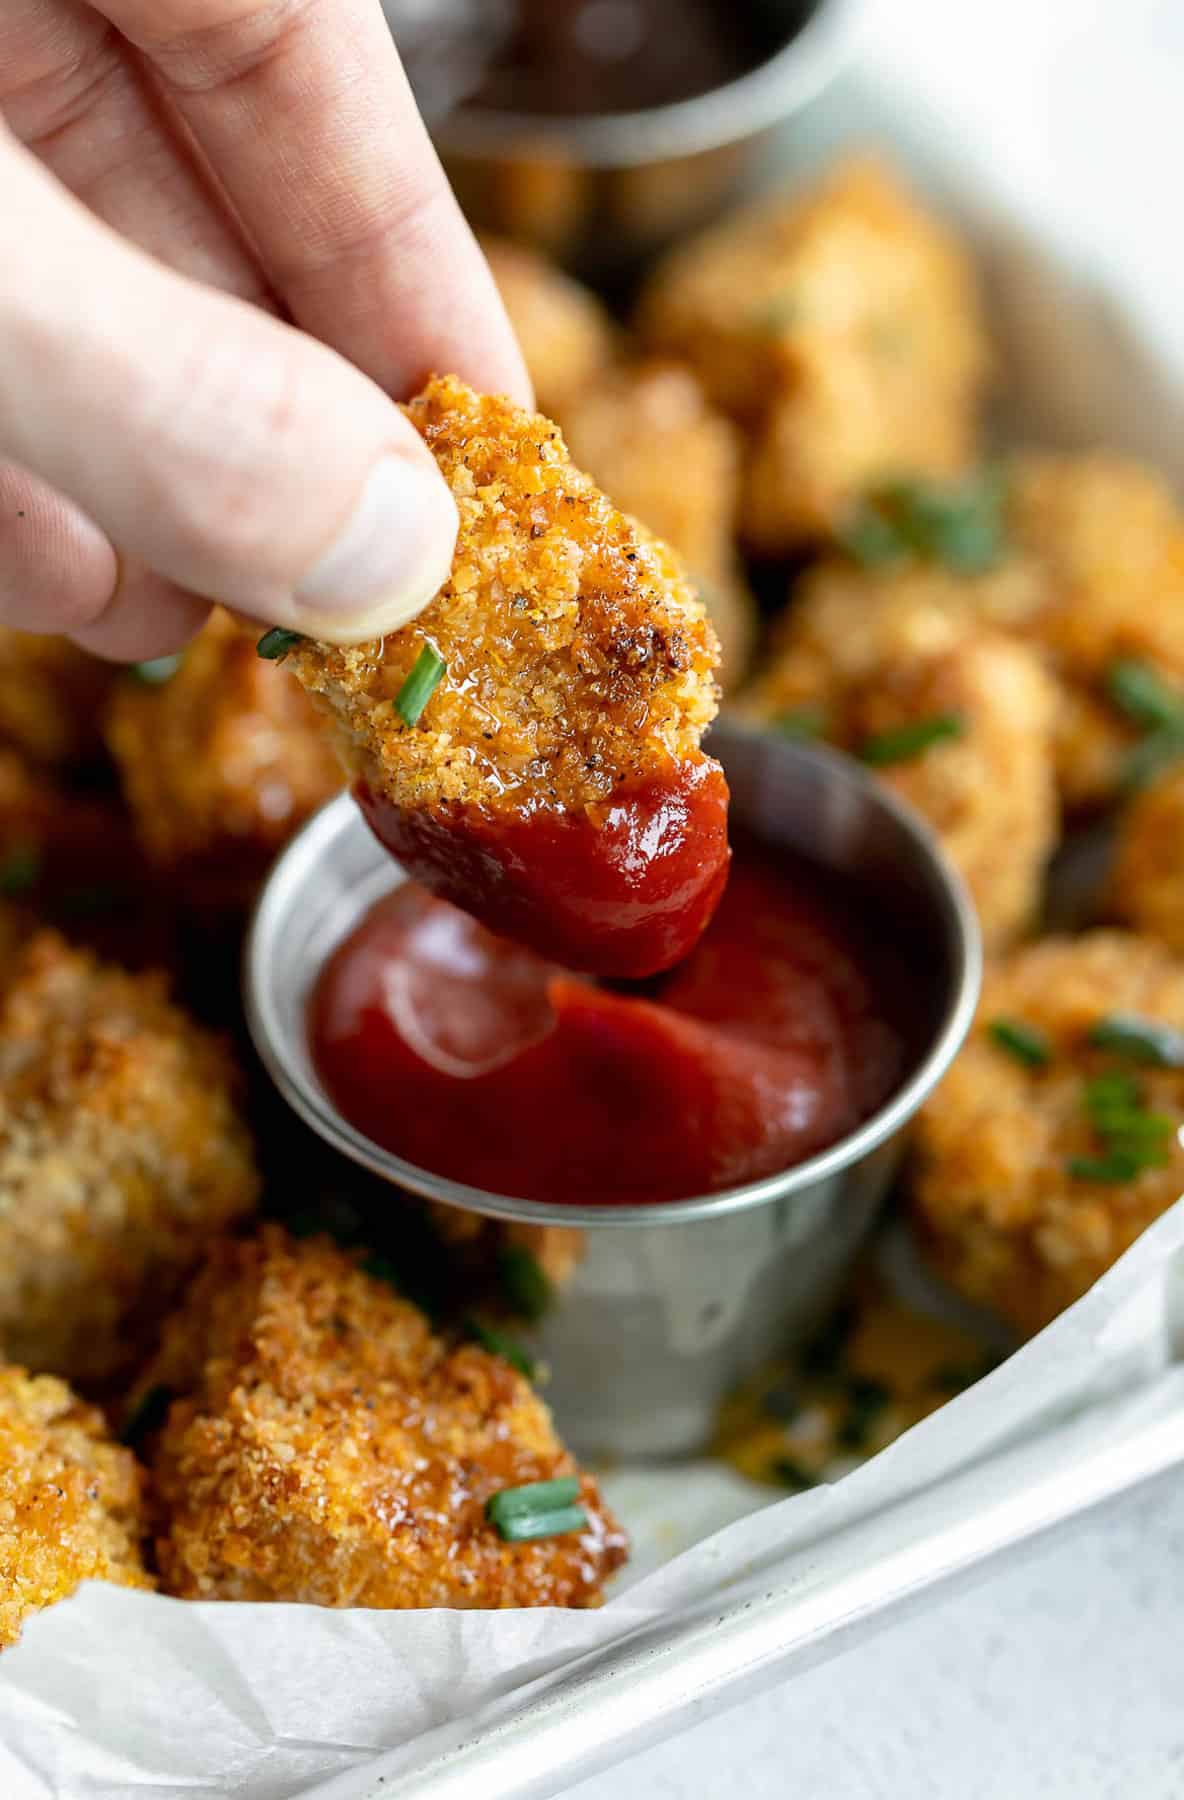 dipping the vegan tofu chicken nugget in ketchup